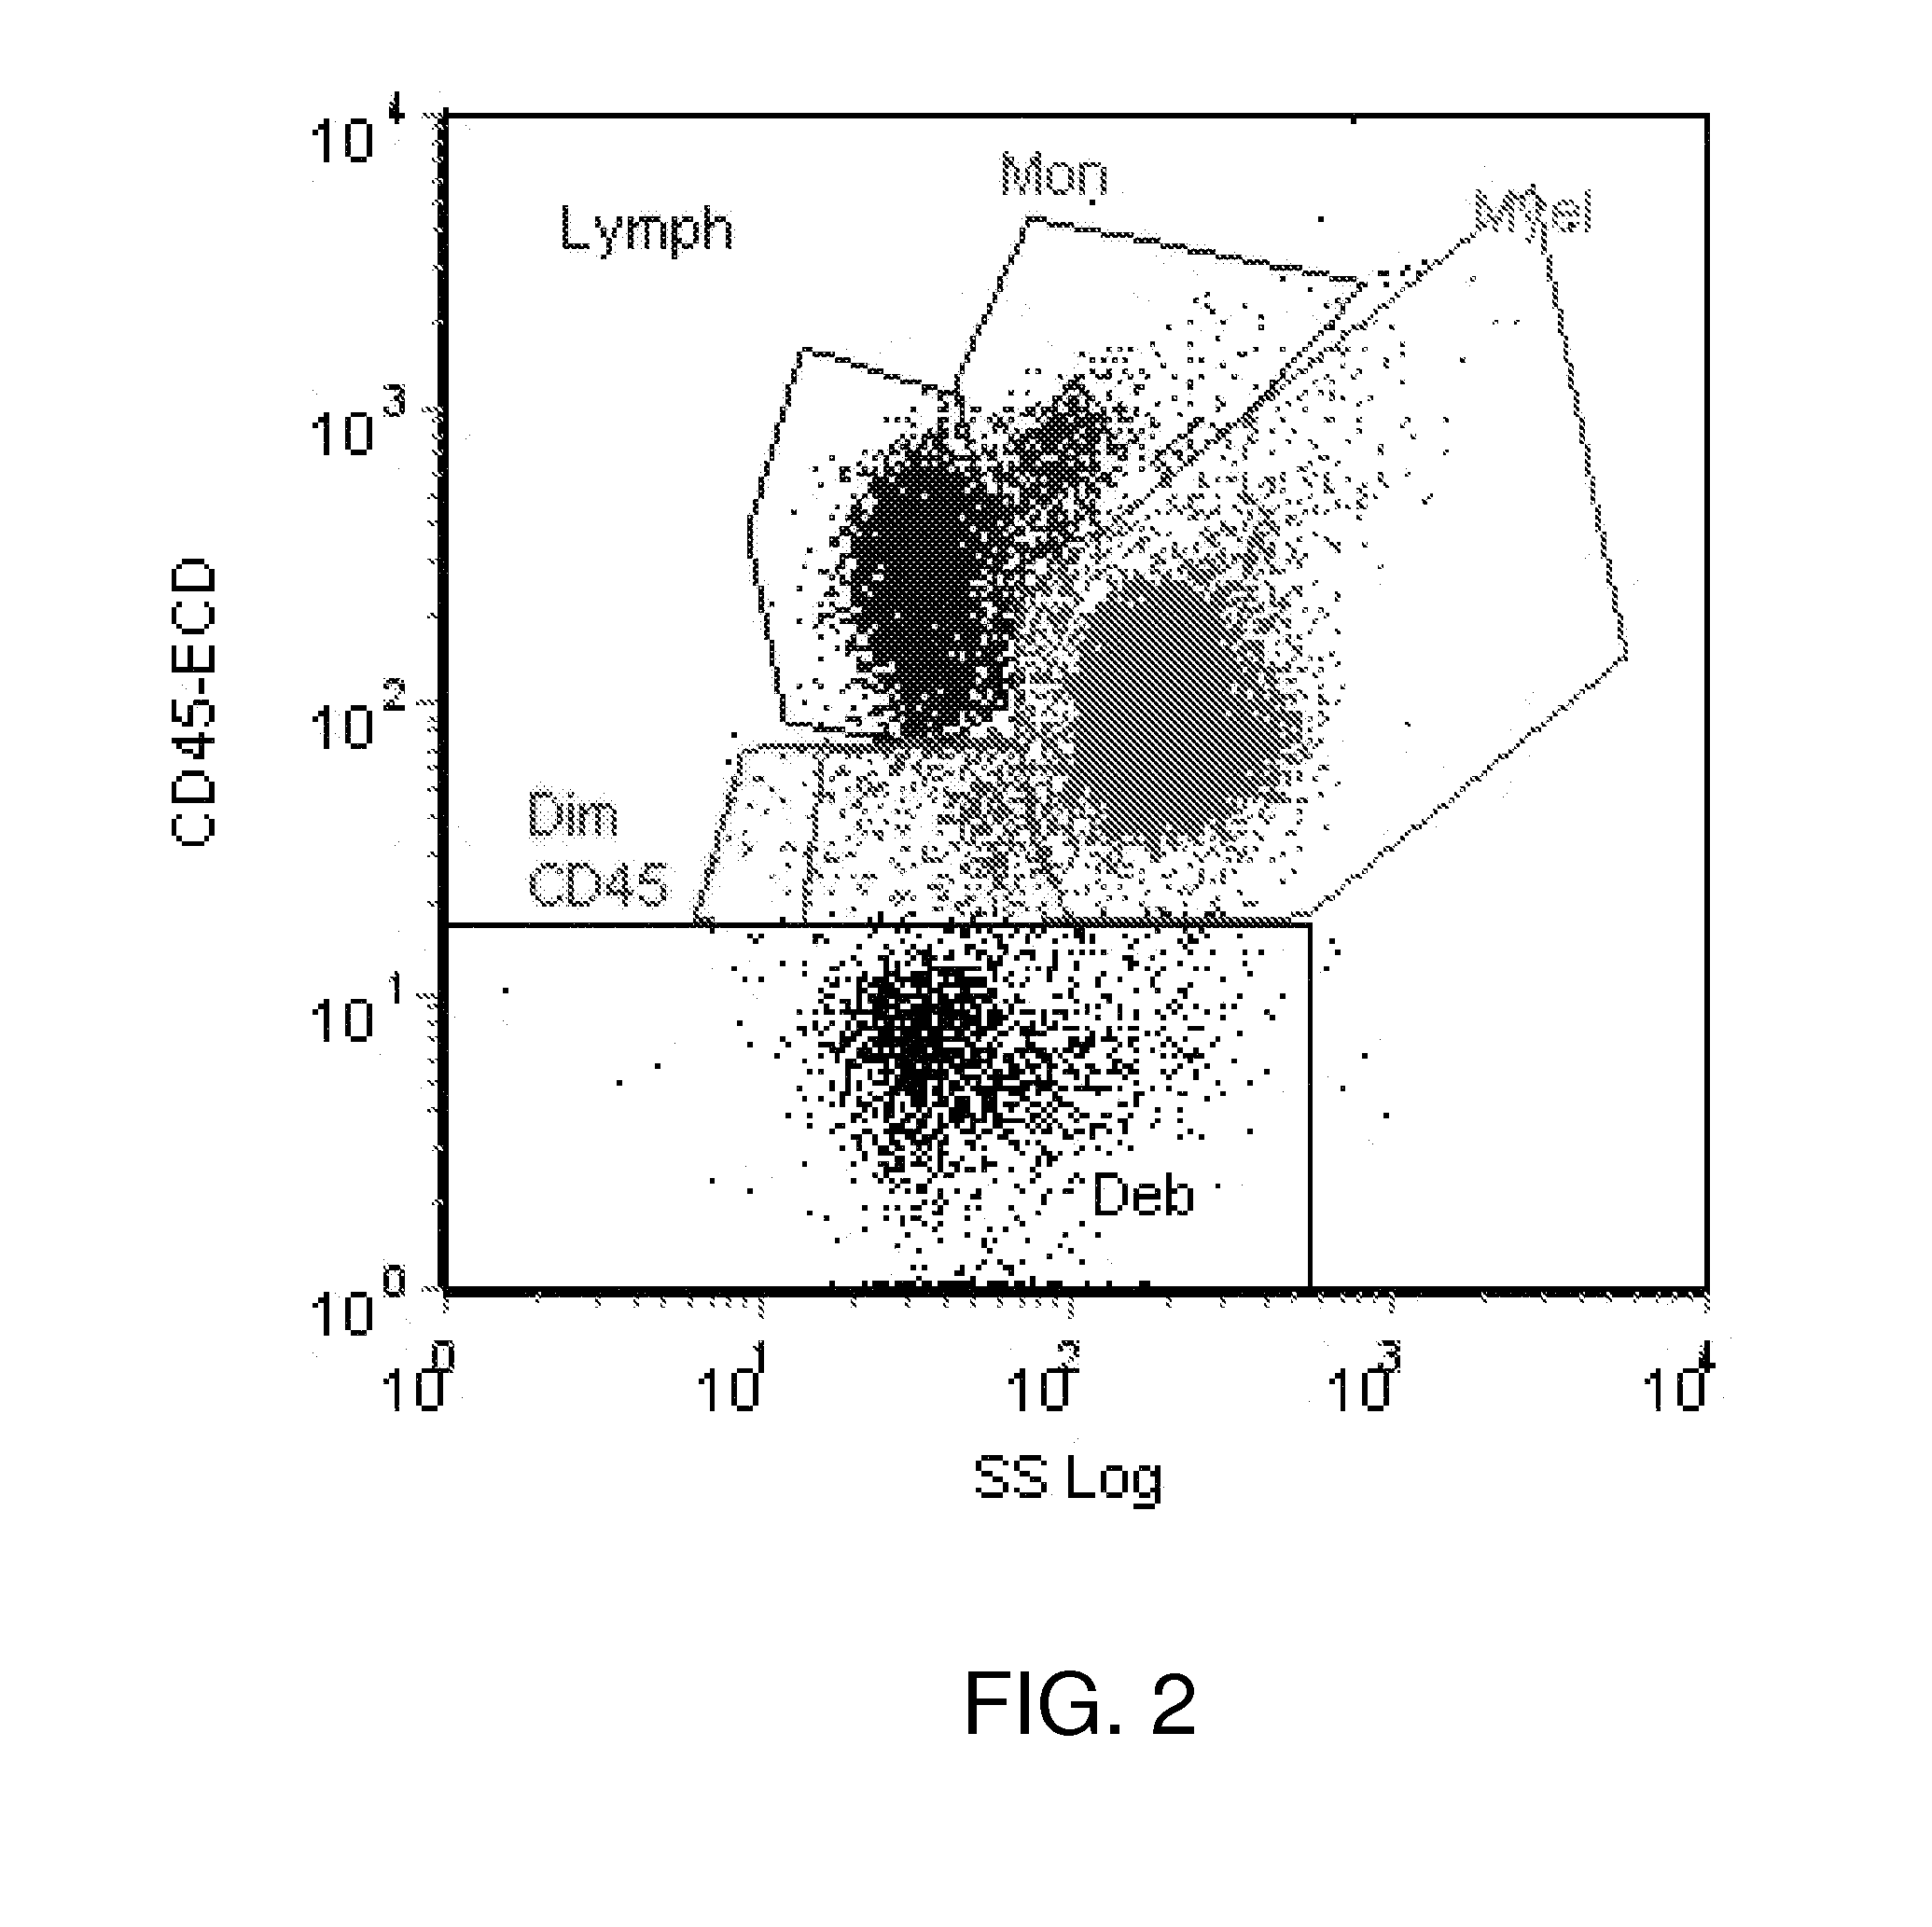 Method and System for Analysis of Flow Cytometry Data Using Support Vector Machines